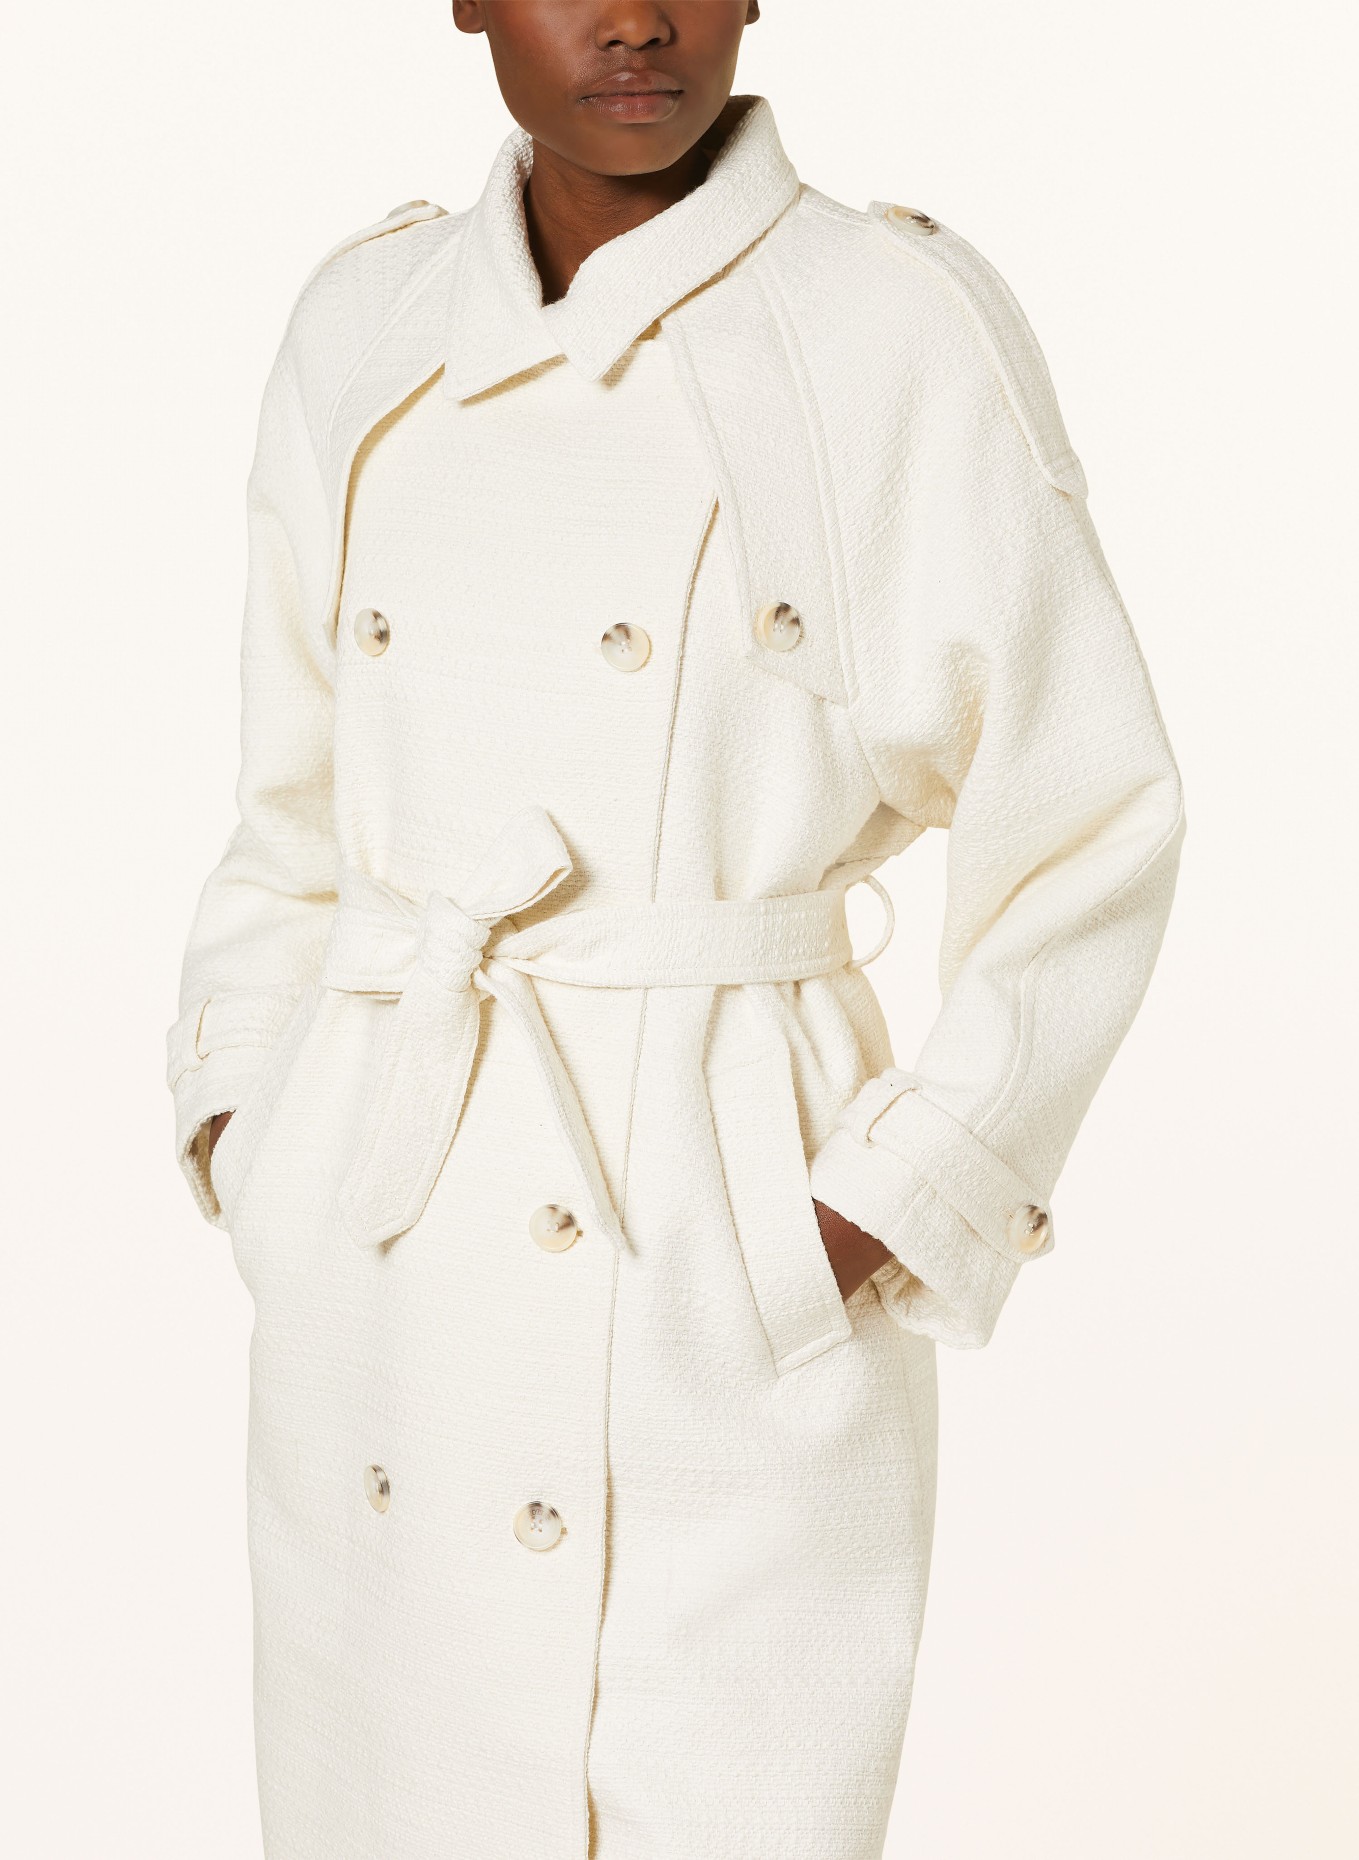 MEOTINE Trench coat BOBBY made of tweed, Color: CREAM (Image 4)